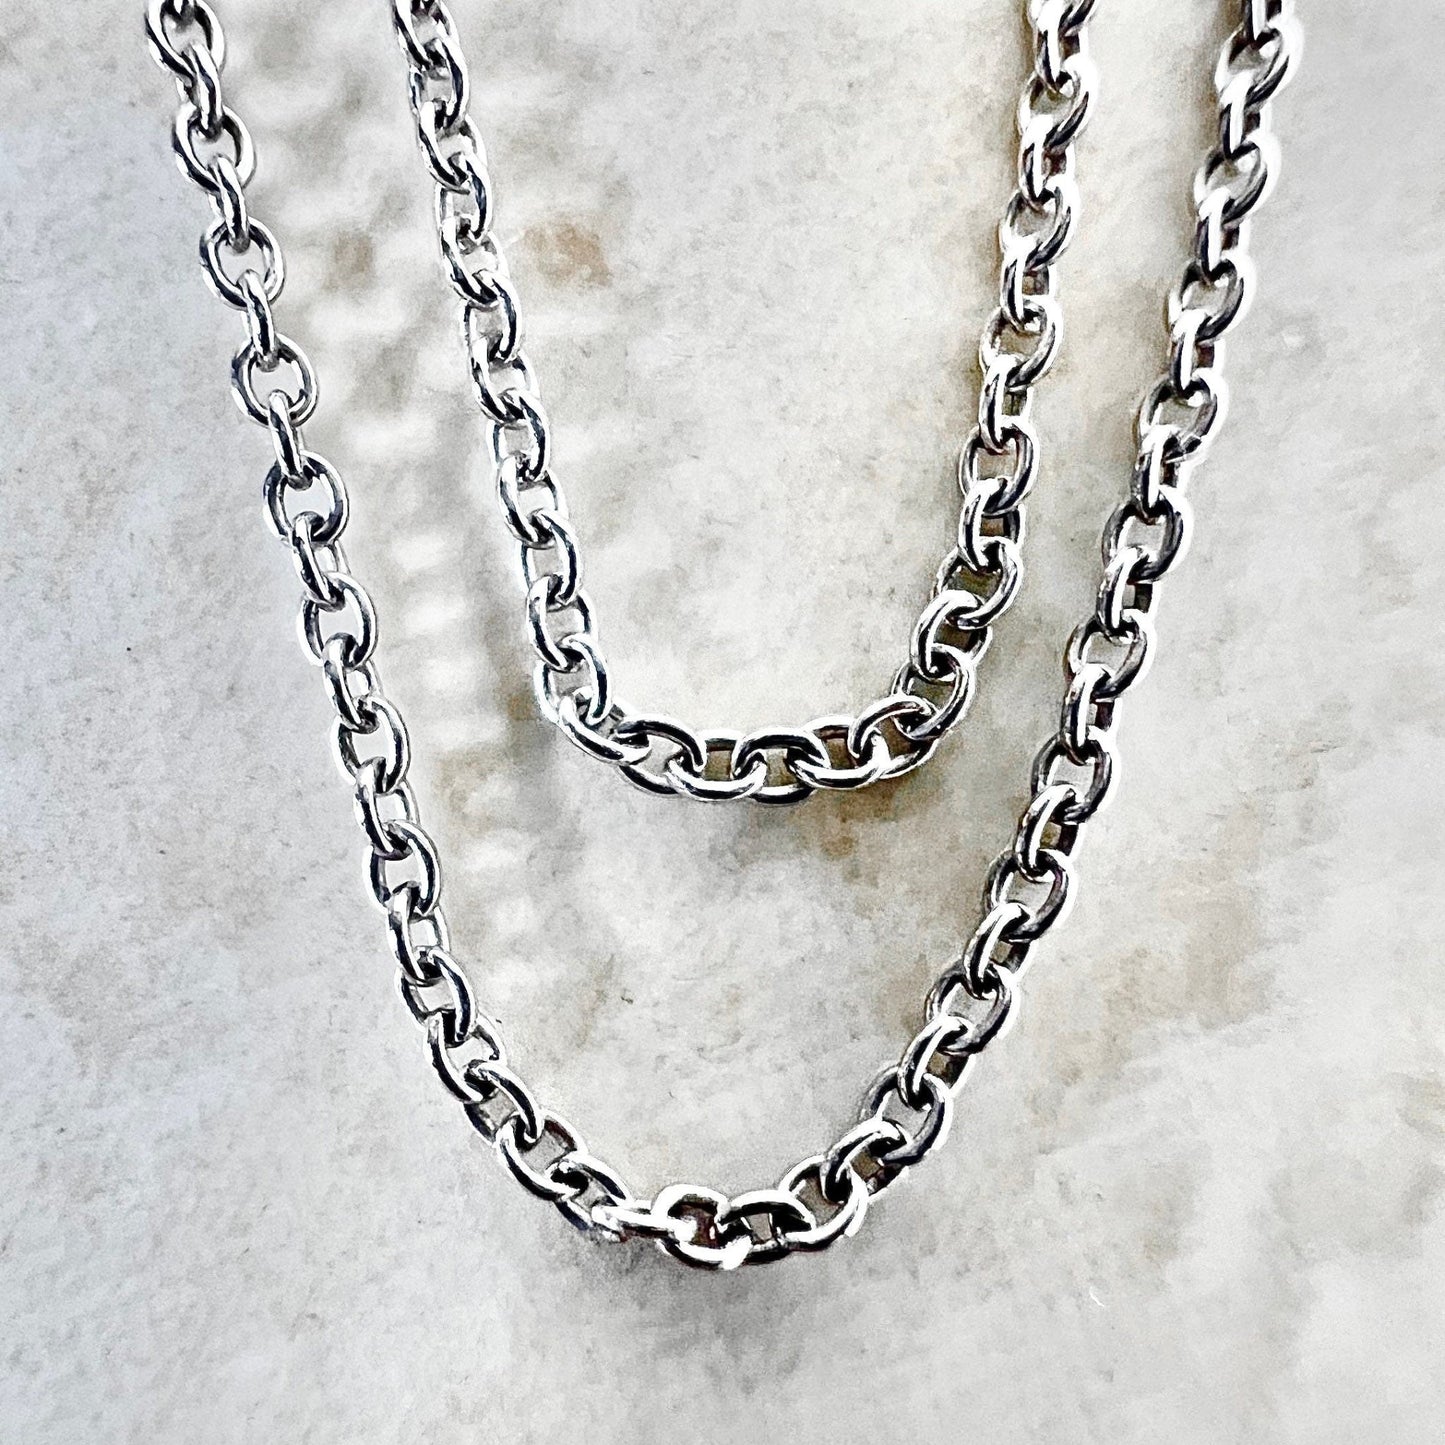 Vintage 14 Karat White Gold 20 Inches Cable Chain Necklace - WeilJewelry